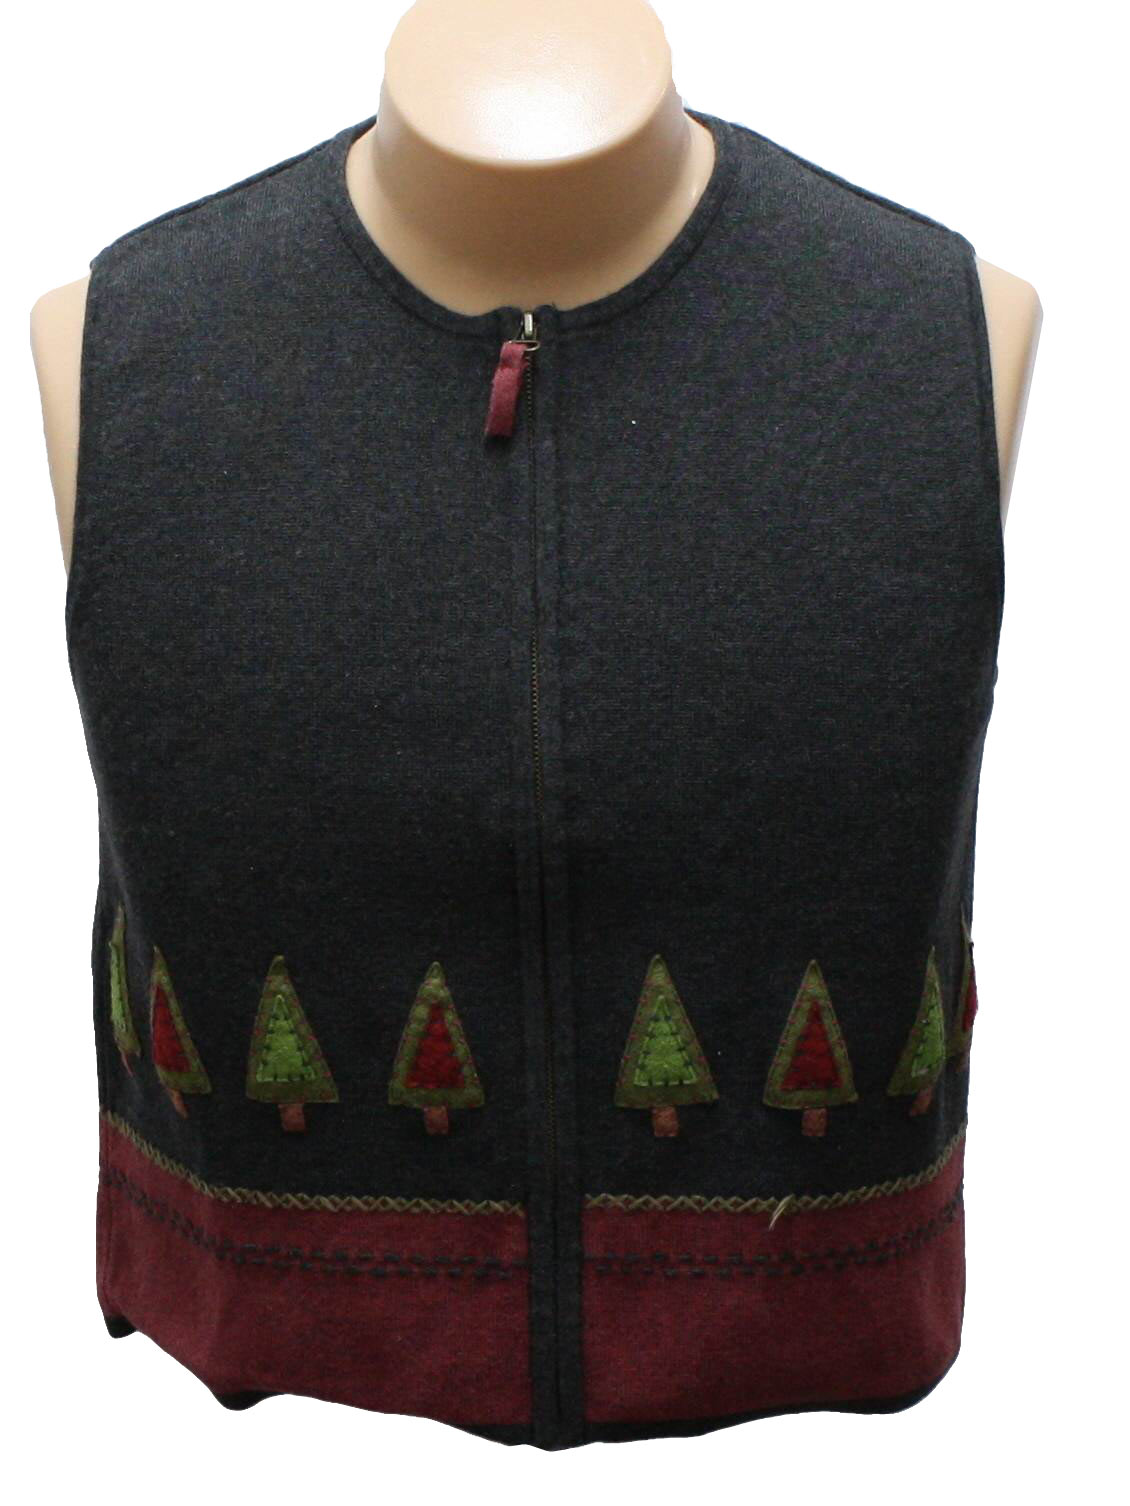 Womens Ugly Christmas Sweater Vest: -Woolrich- Womens gray background ...